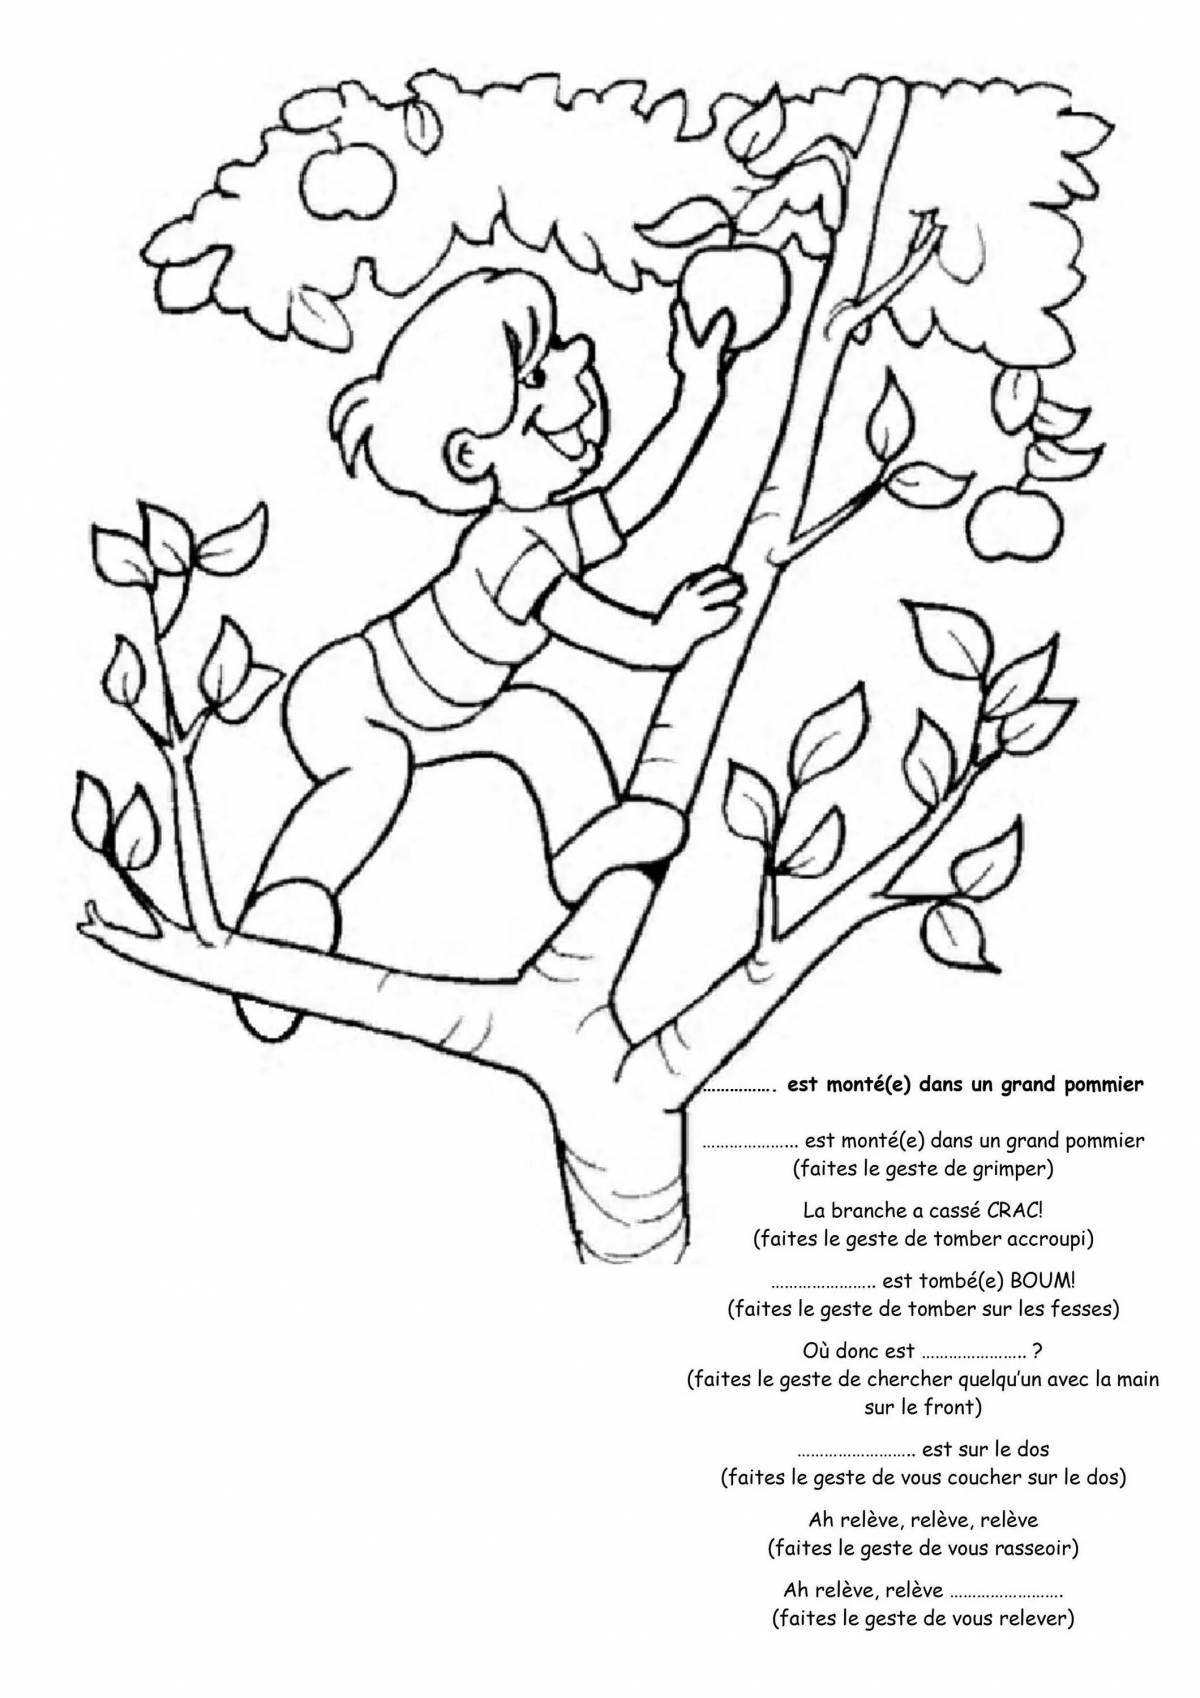 Perfect coloring page rules of conduct in nature